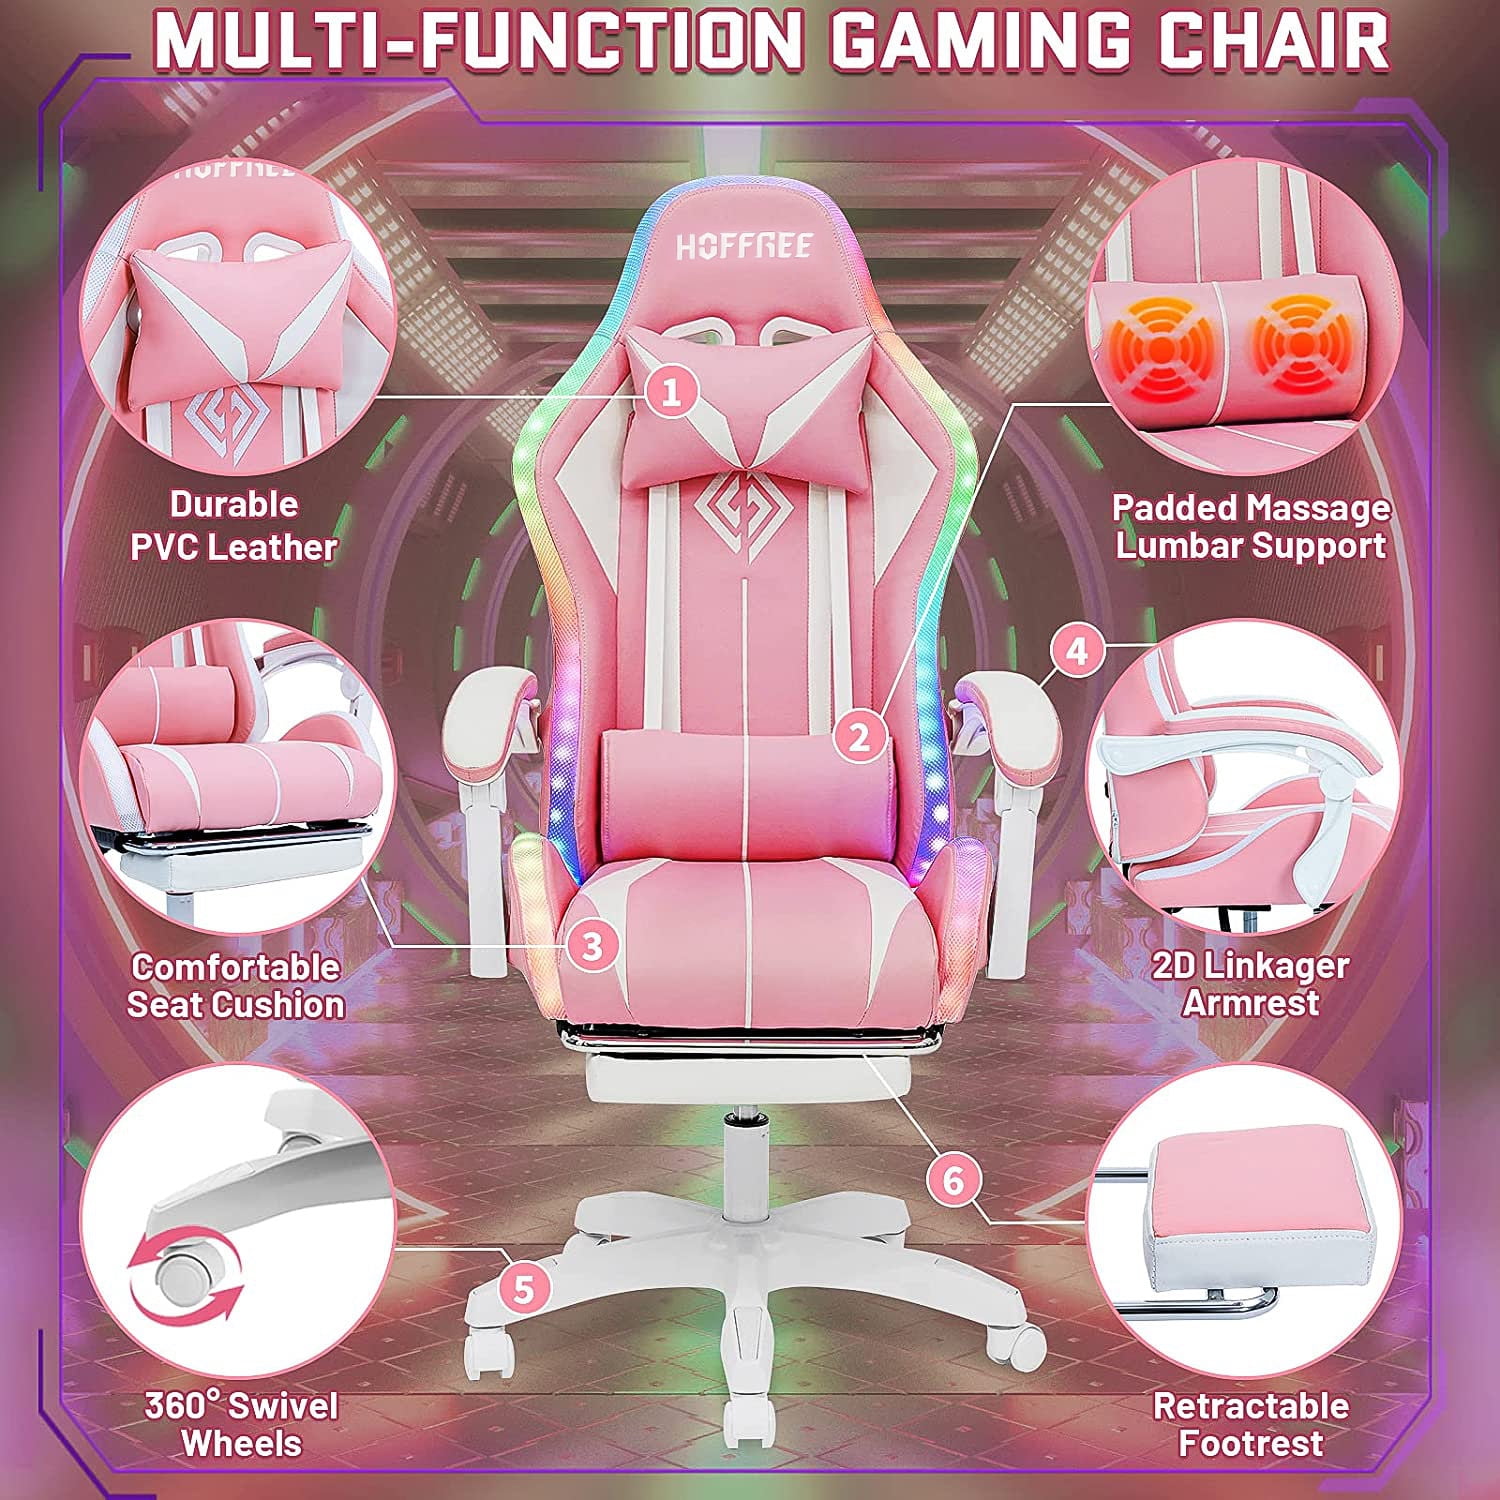 Under Desk Foot Rest Ergonomic Foot Rest Comfortable Compact for Home  Gaming Pink - AliExpress